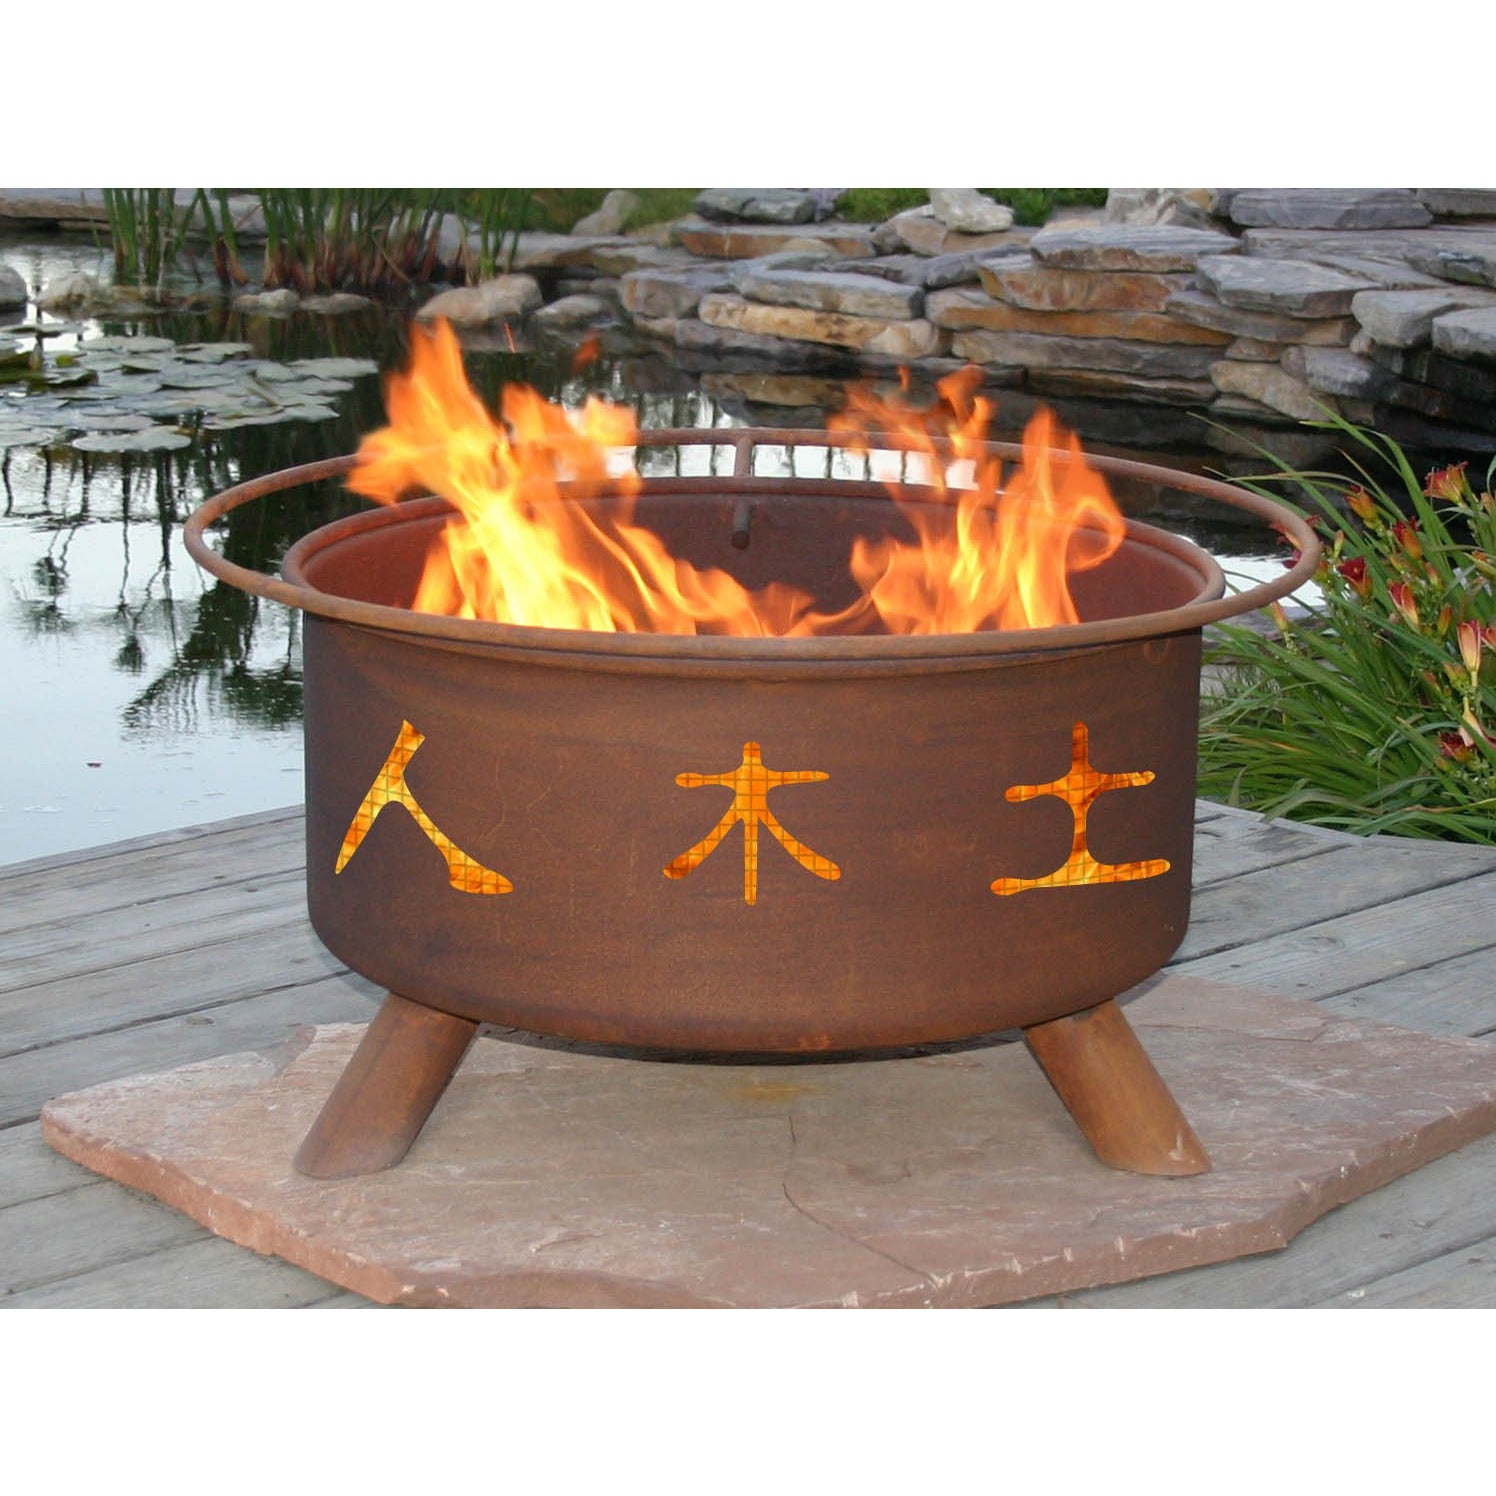 Chinese Symbols Design Steel Wood and Charcoal Fire Pit for Patio, Fireplace - Yardify.com